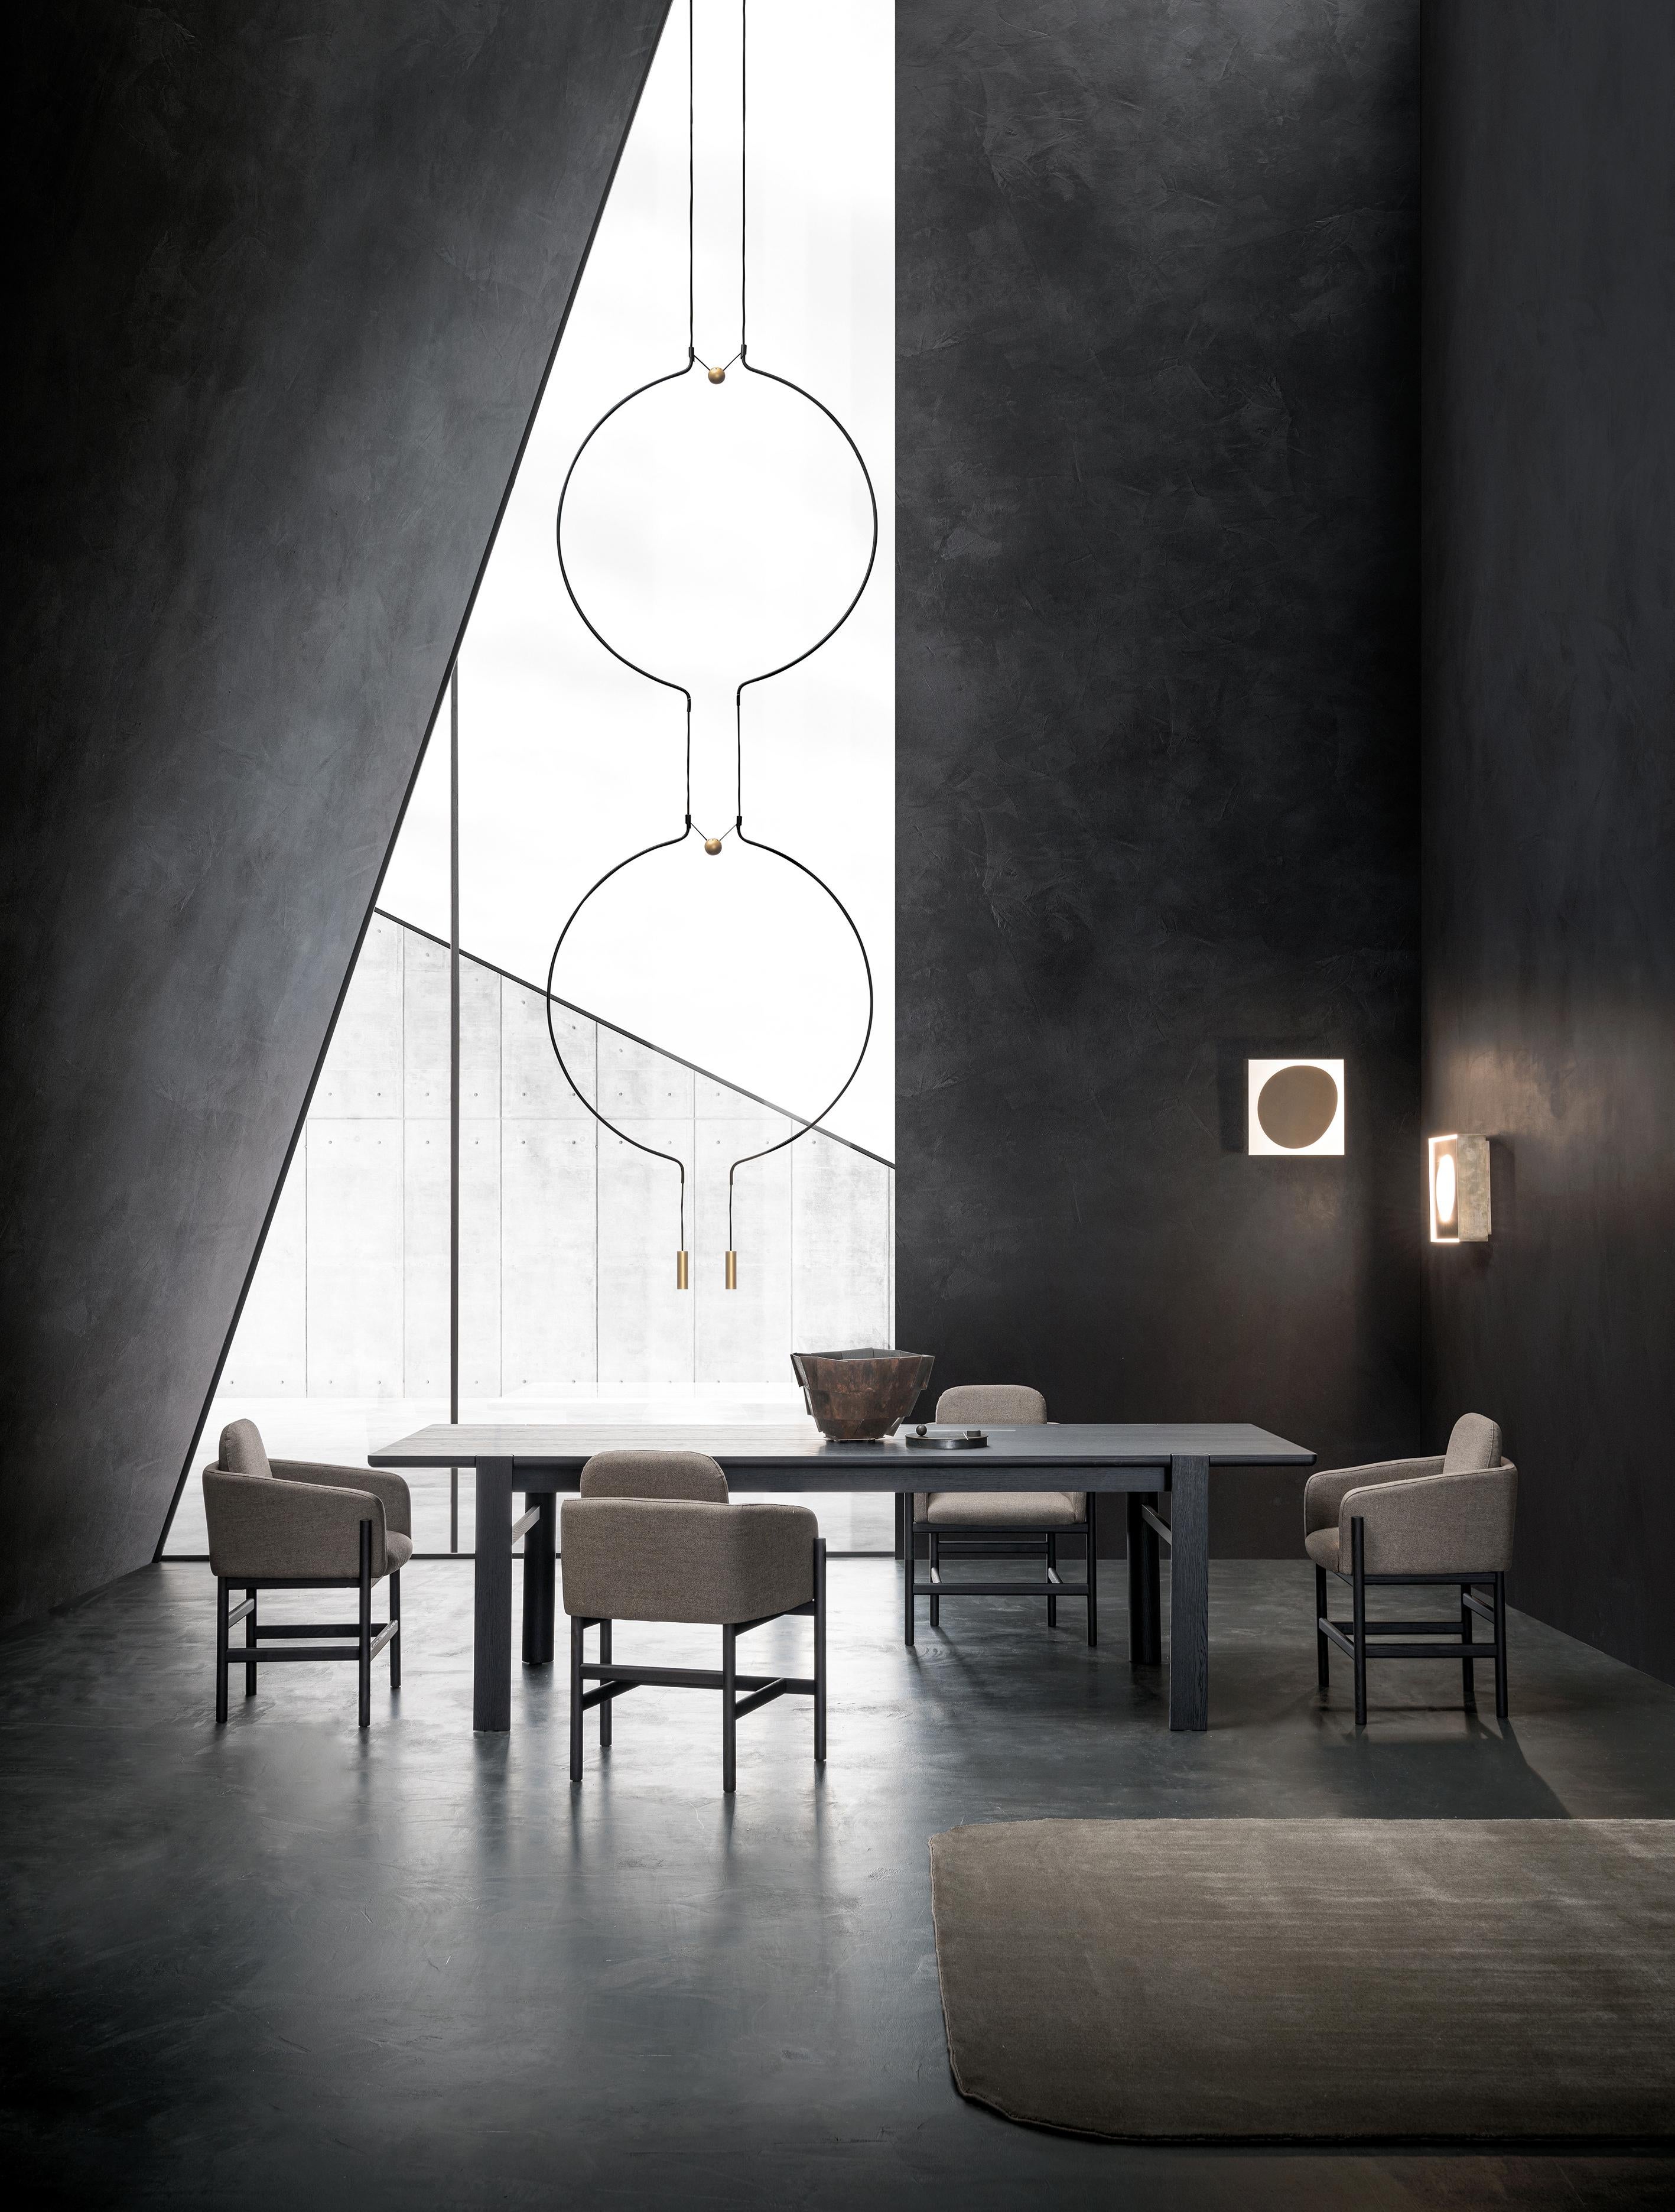 Axolight Liaison Model M4 Pendant Lamp in Black/Black by Sara Moroni

Modular lightness and elegance. Liaison tells about the perfect balance of three geometric archetypes: sphere, circle and cylinder compose a system that includes the single